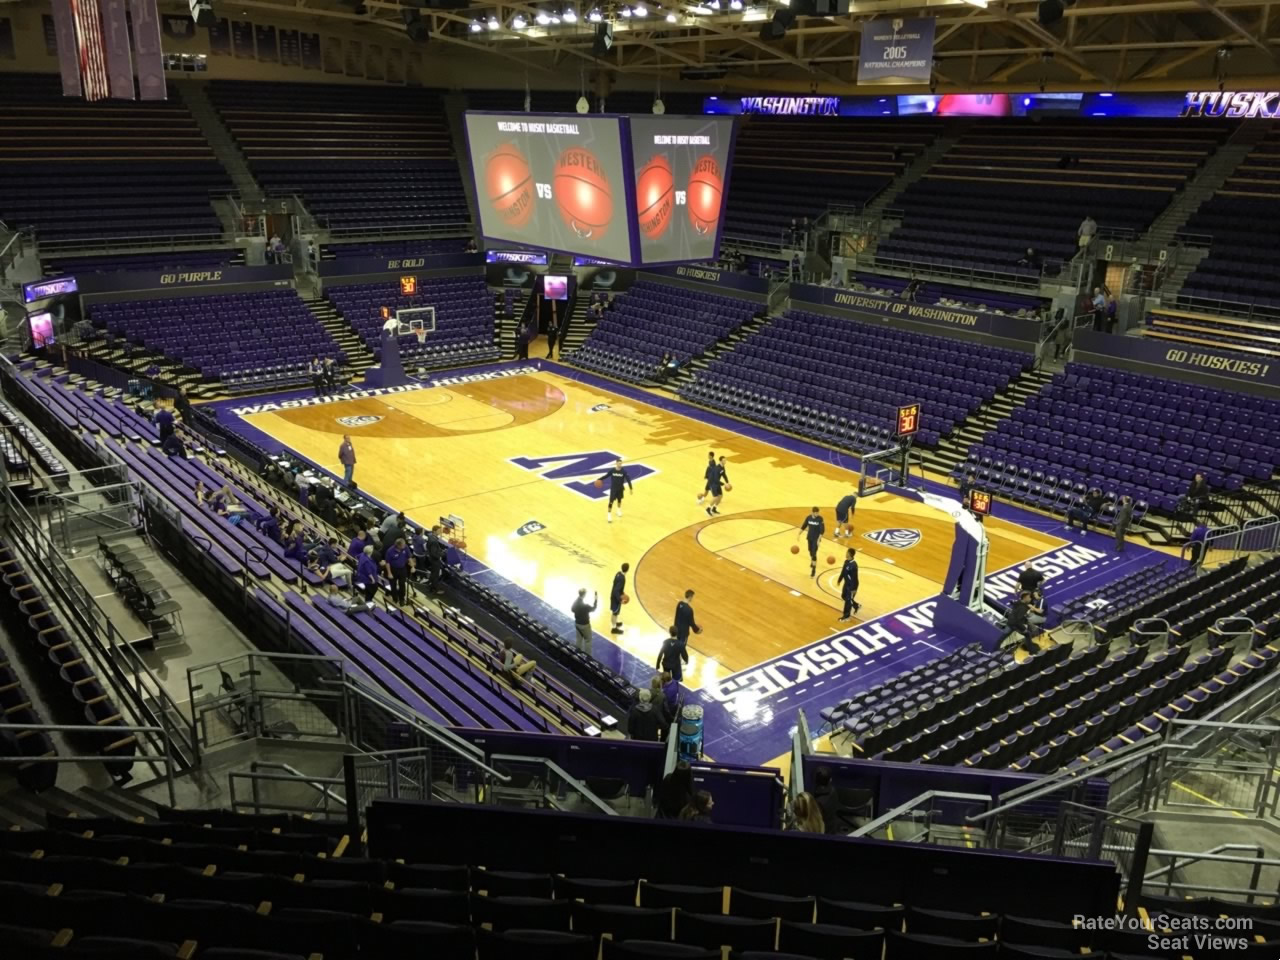 Section 13 at Alaska Airlines Arena